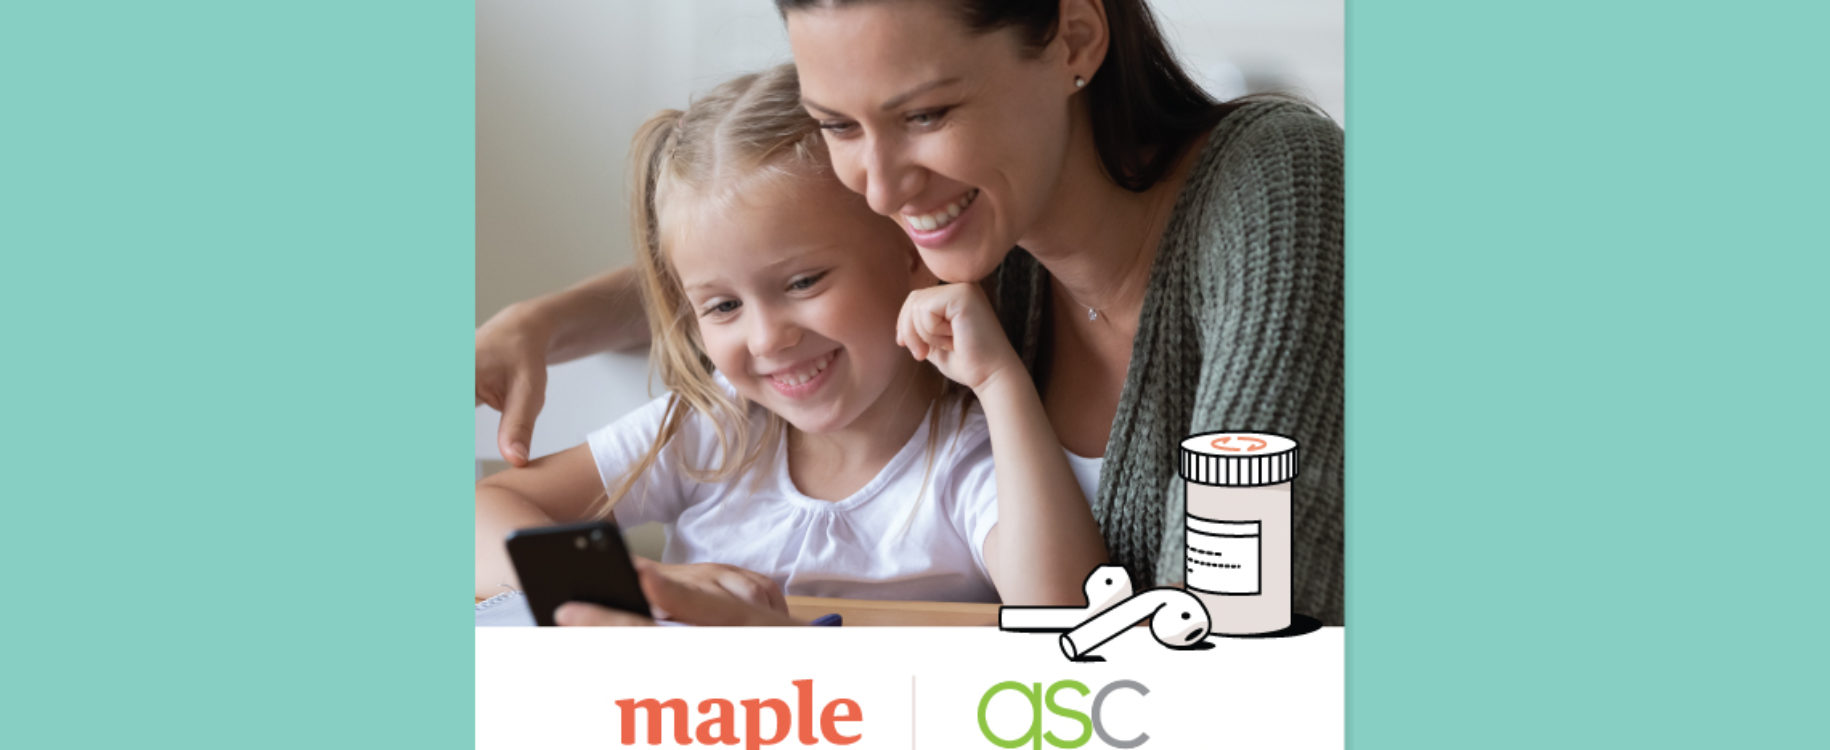 Maple and Green Shield Canada Bring Virtual Care Access to Group Plan Members